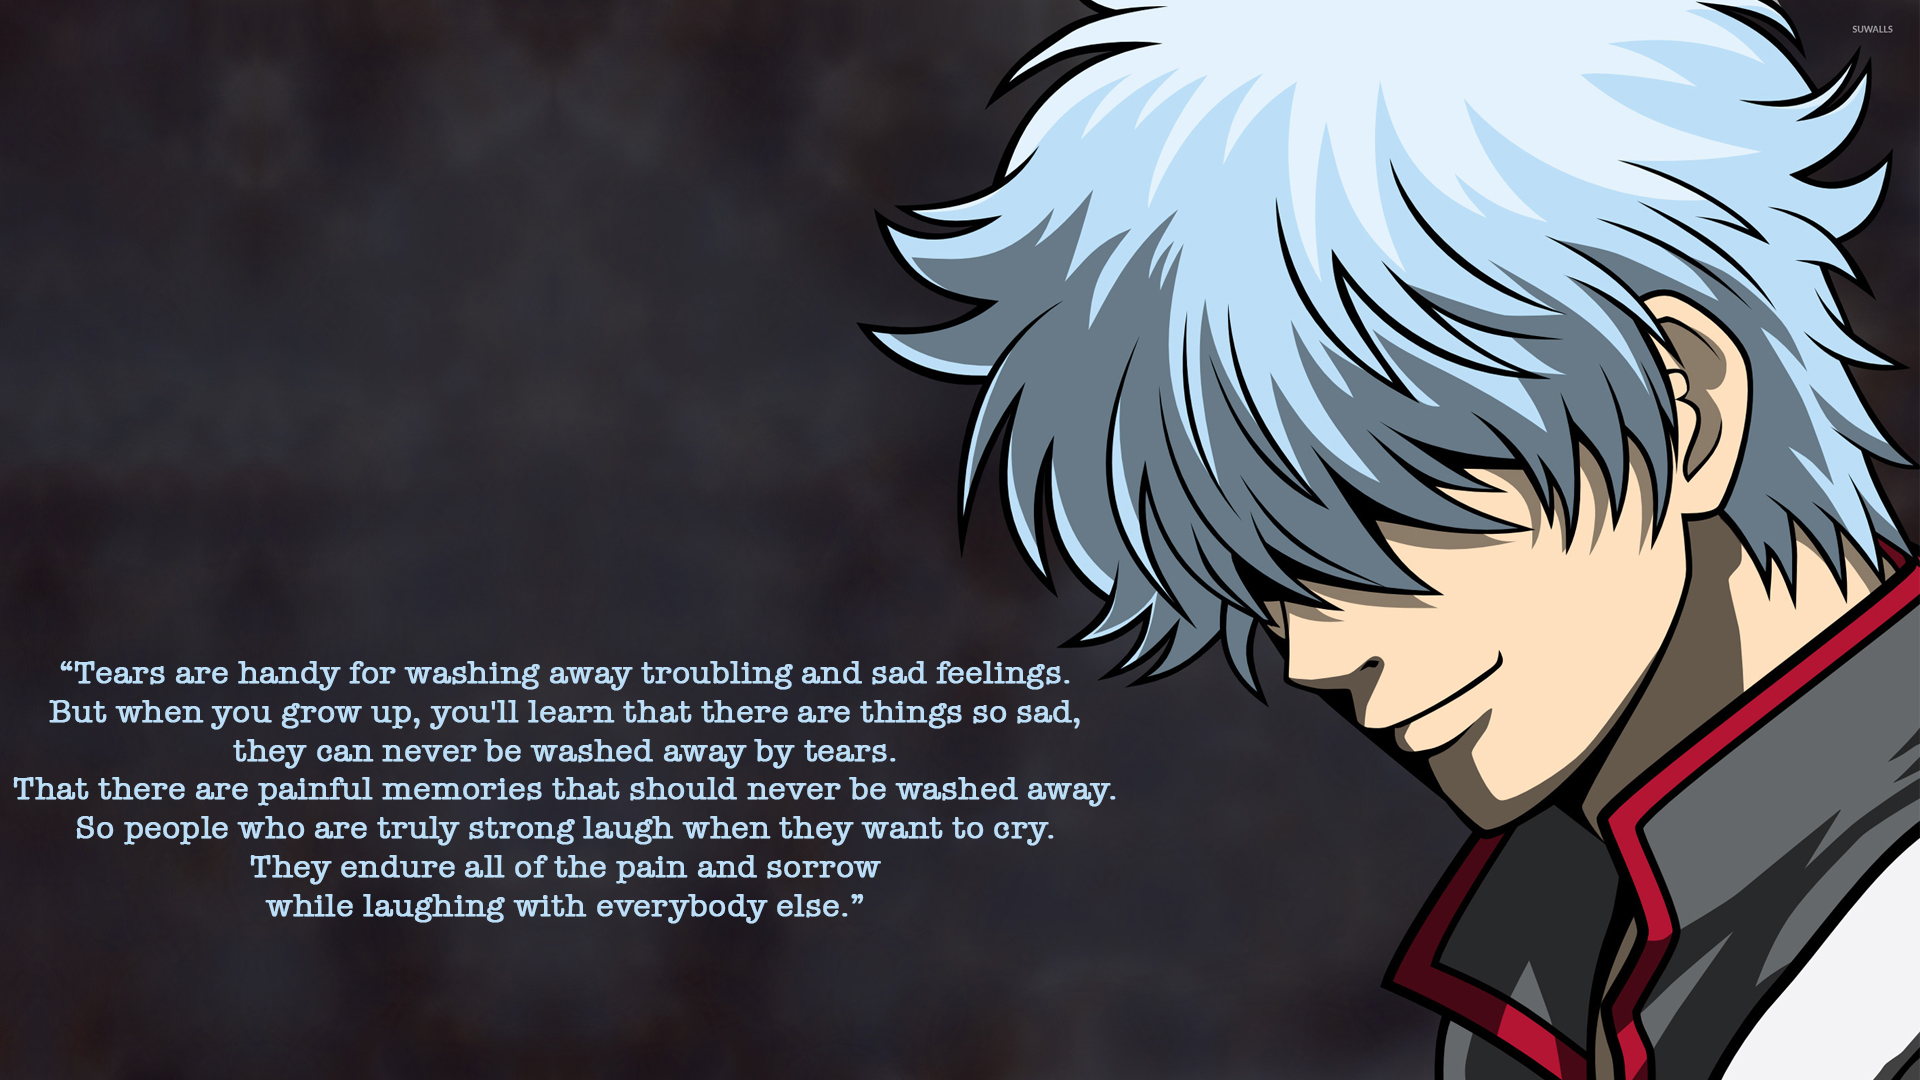 Gintama wallpaper with quotes 1 1920x1080 by Arsenof on ...